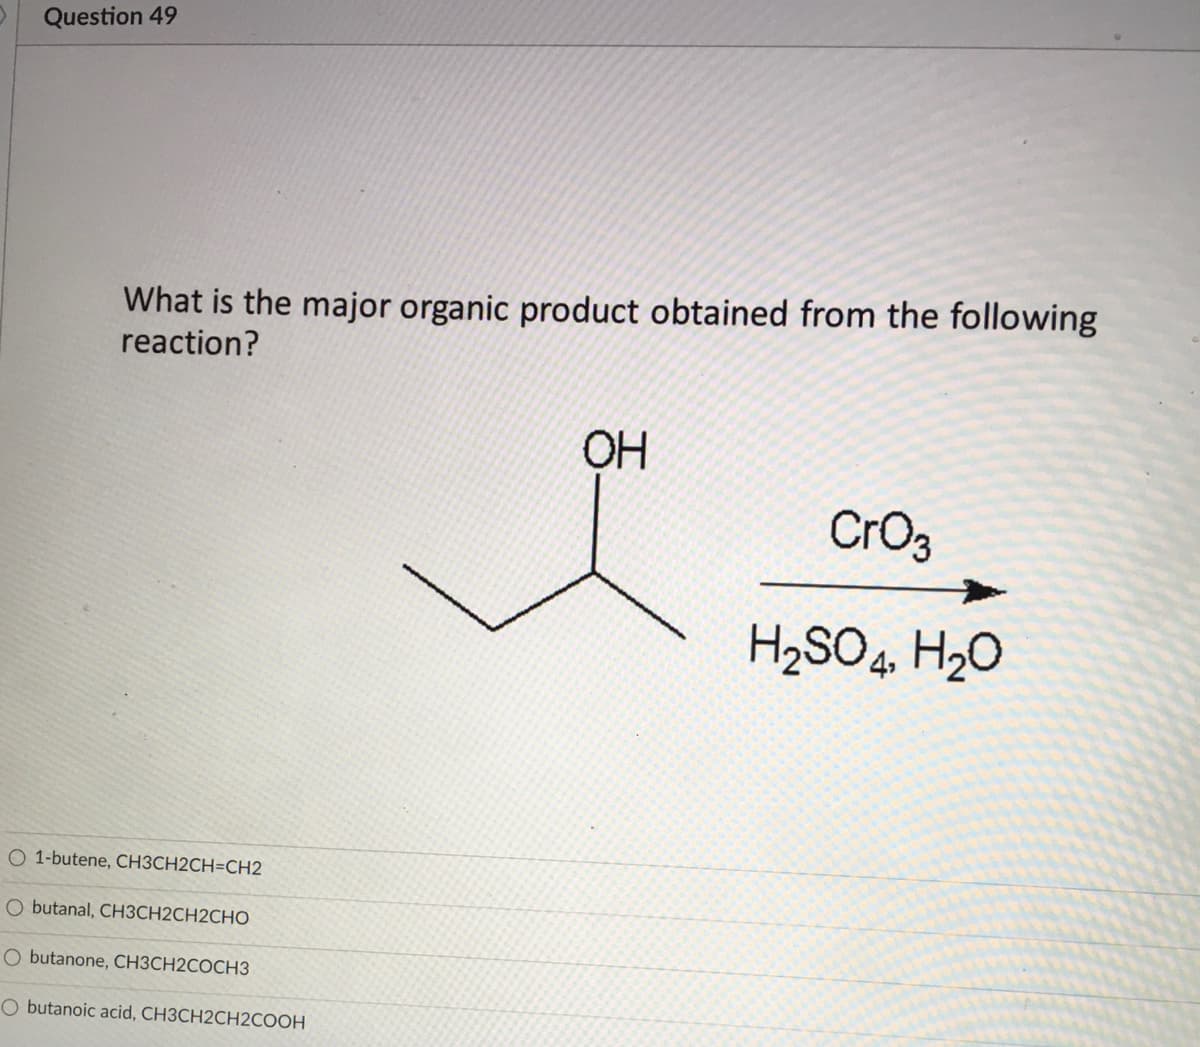 Question 49
What is the major organic product obtained from the following
reaction?
OH
CrO3
H,SO4, H20
O 1-butene, CH3CH2CH=CH2
O butanal, CH3CH2CH2CHO
O butanone, CH3CH2COCH3
O butanoic acid, CH3CH2CH2COOH
